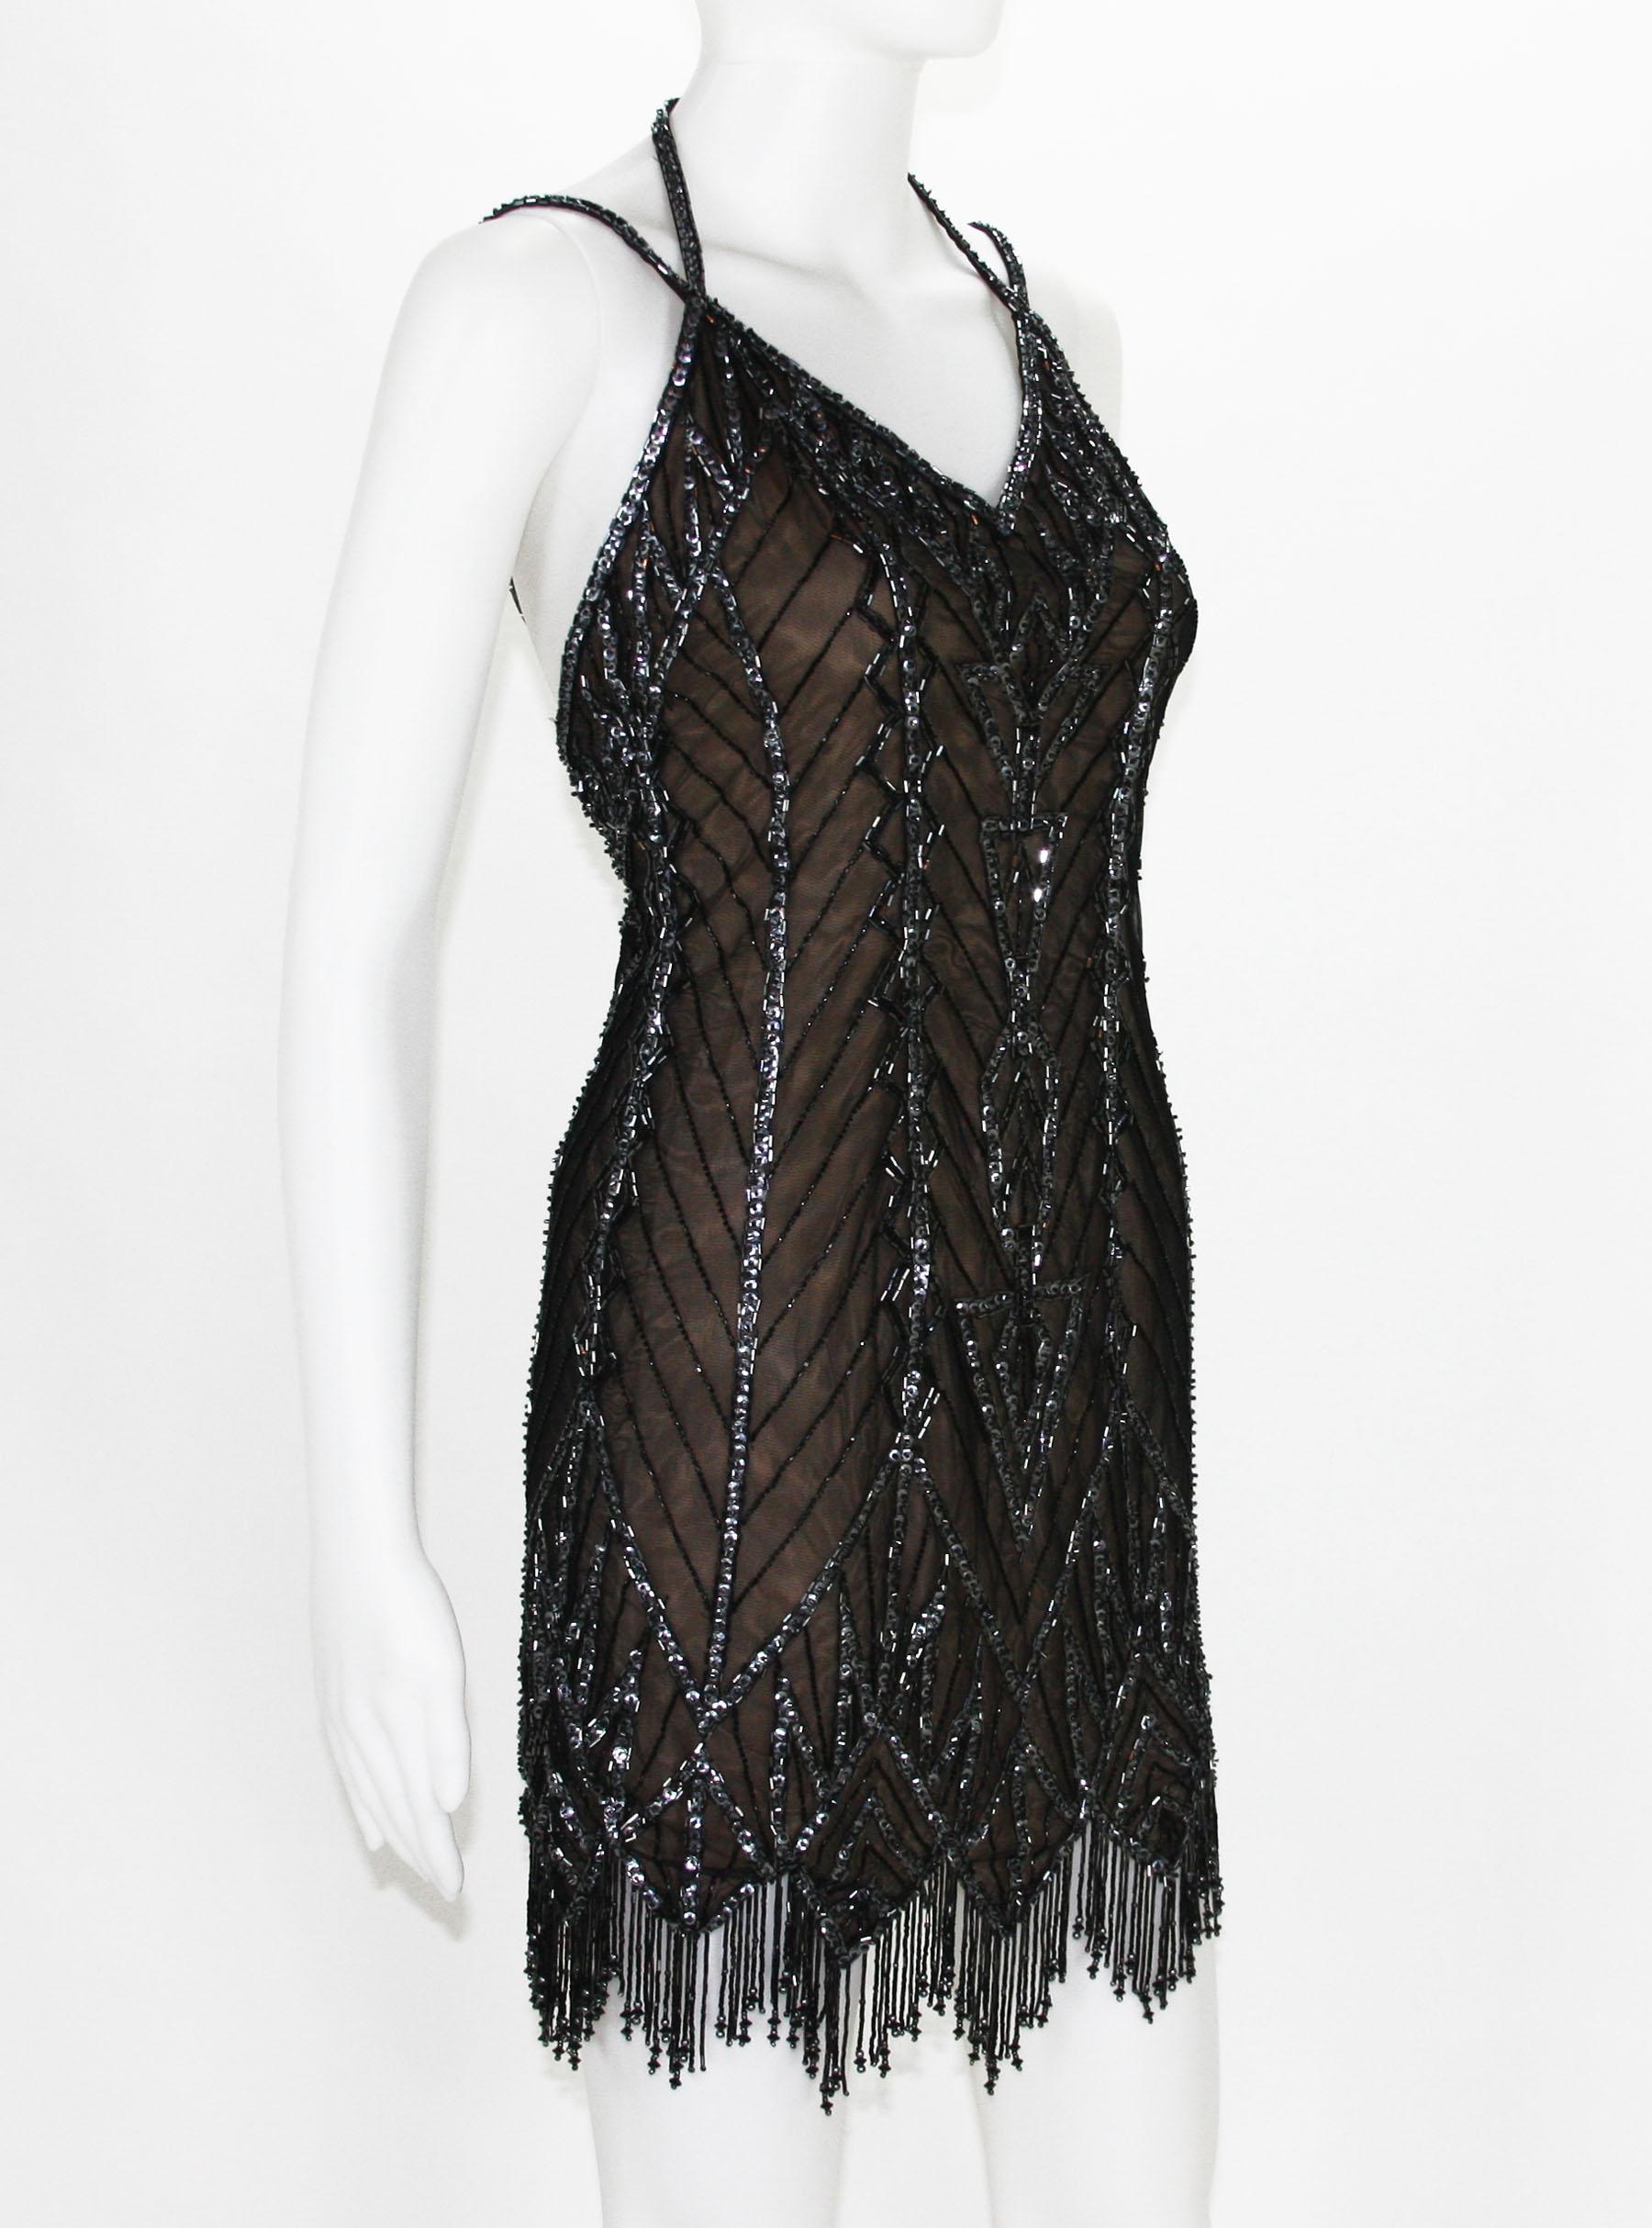 Bob Mackie Black Mini Fully Beaded Dress
The dress from Fall/Winter 1991 show in New York. 
Designer size - 4 (please check measurements).
Measurements: Length - 32 inches includes fringe, Bust - 32/34, Waist - 26/28. Dress have some